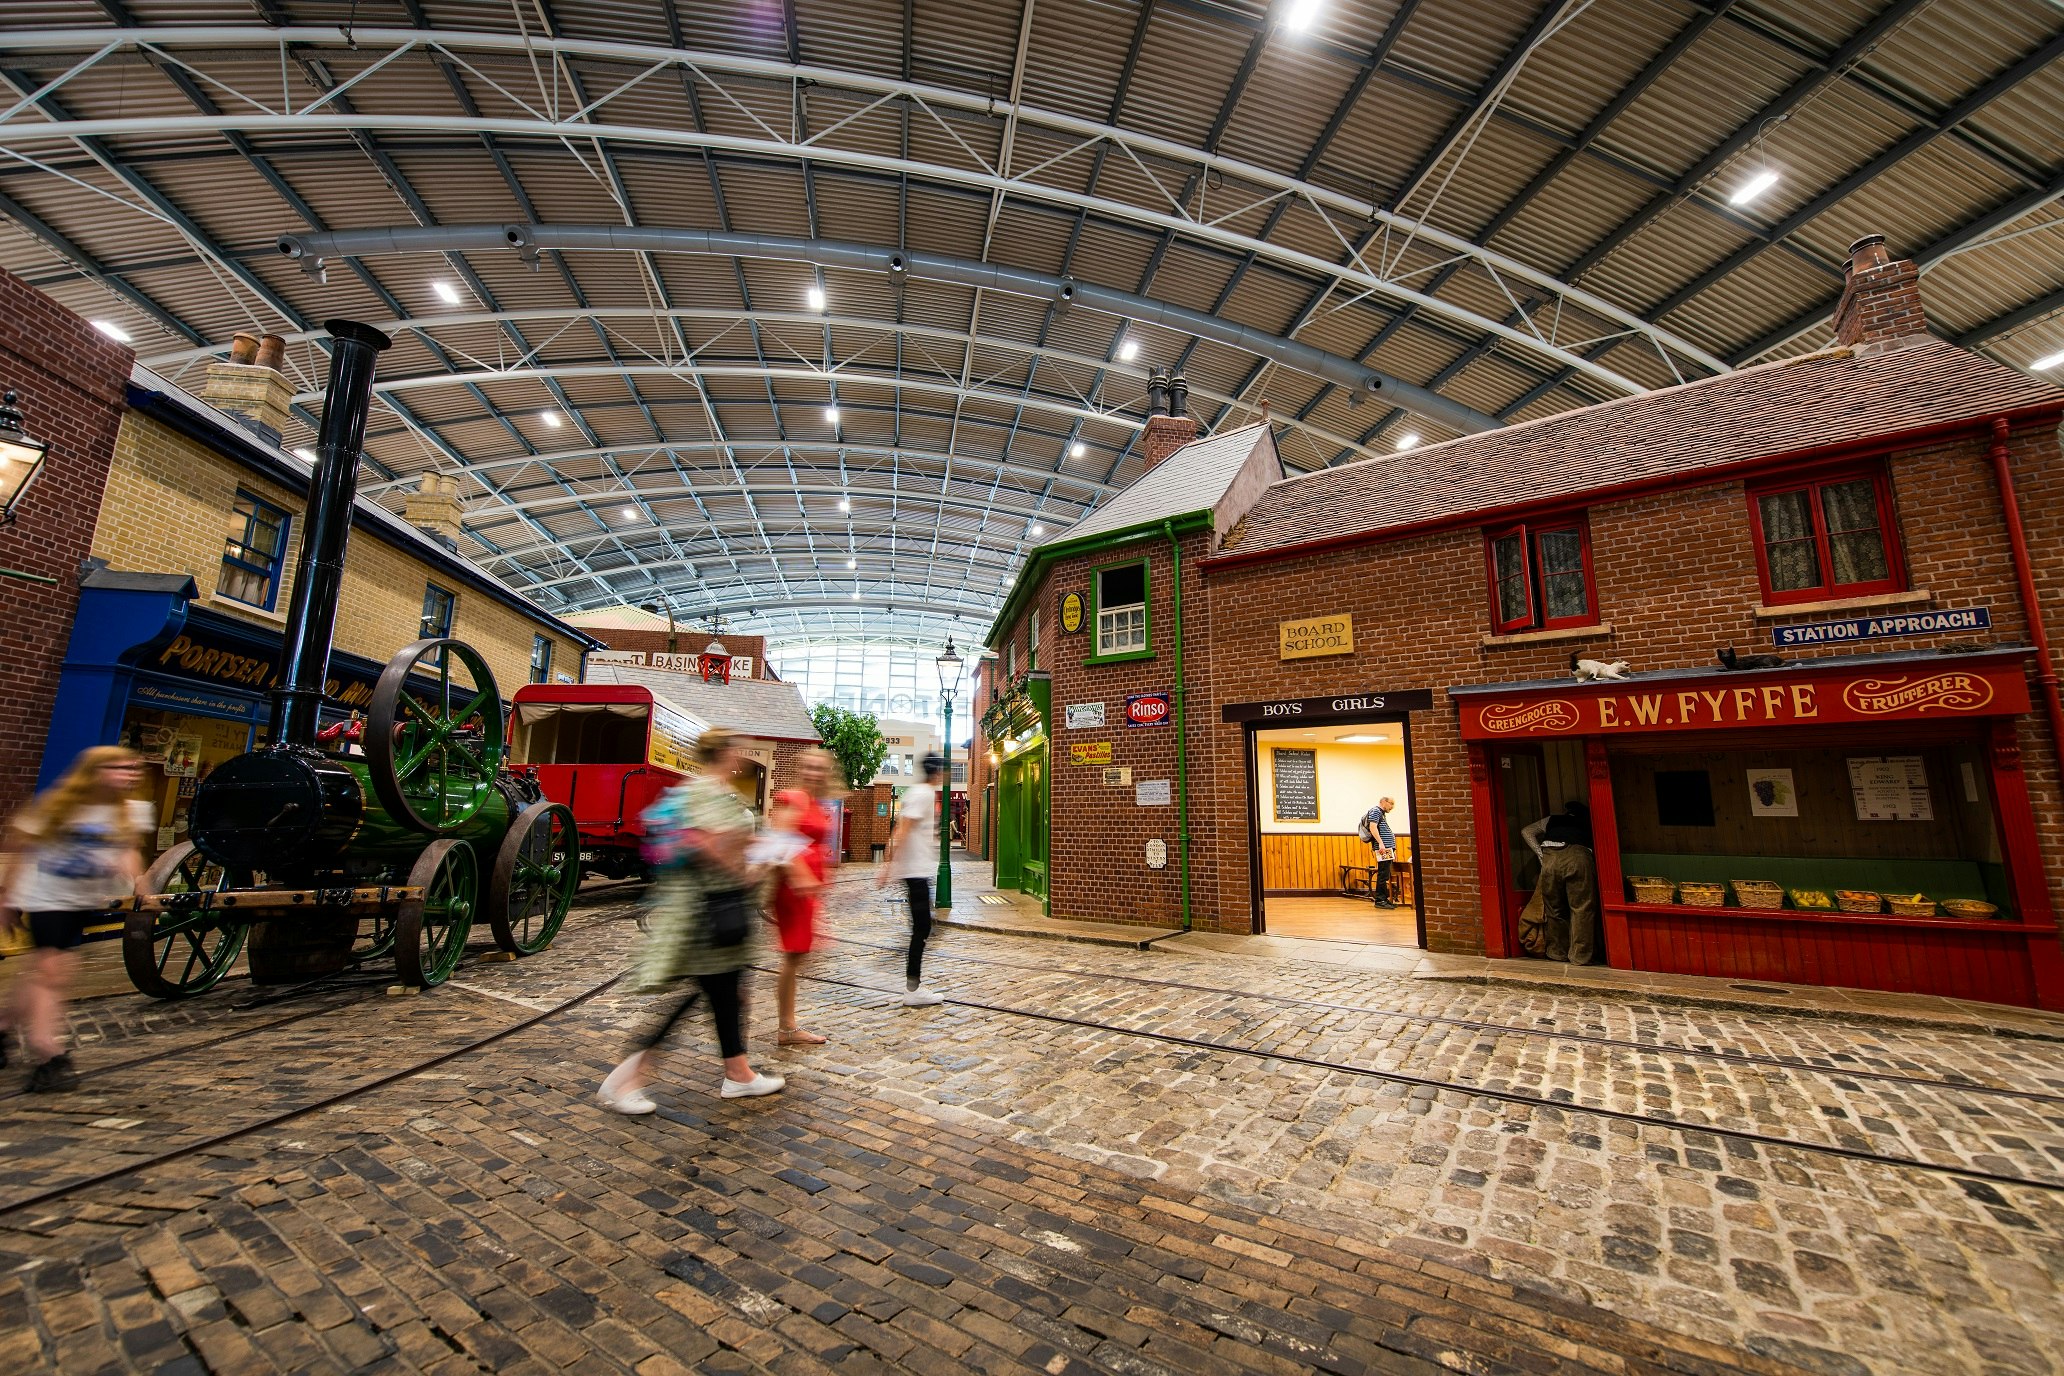 The cobbled streets of milestones museum. You can see some shops and vehicles and people walking around.